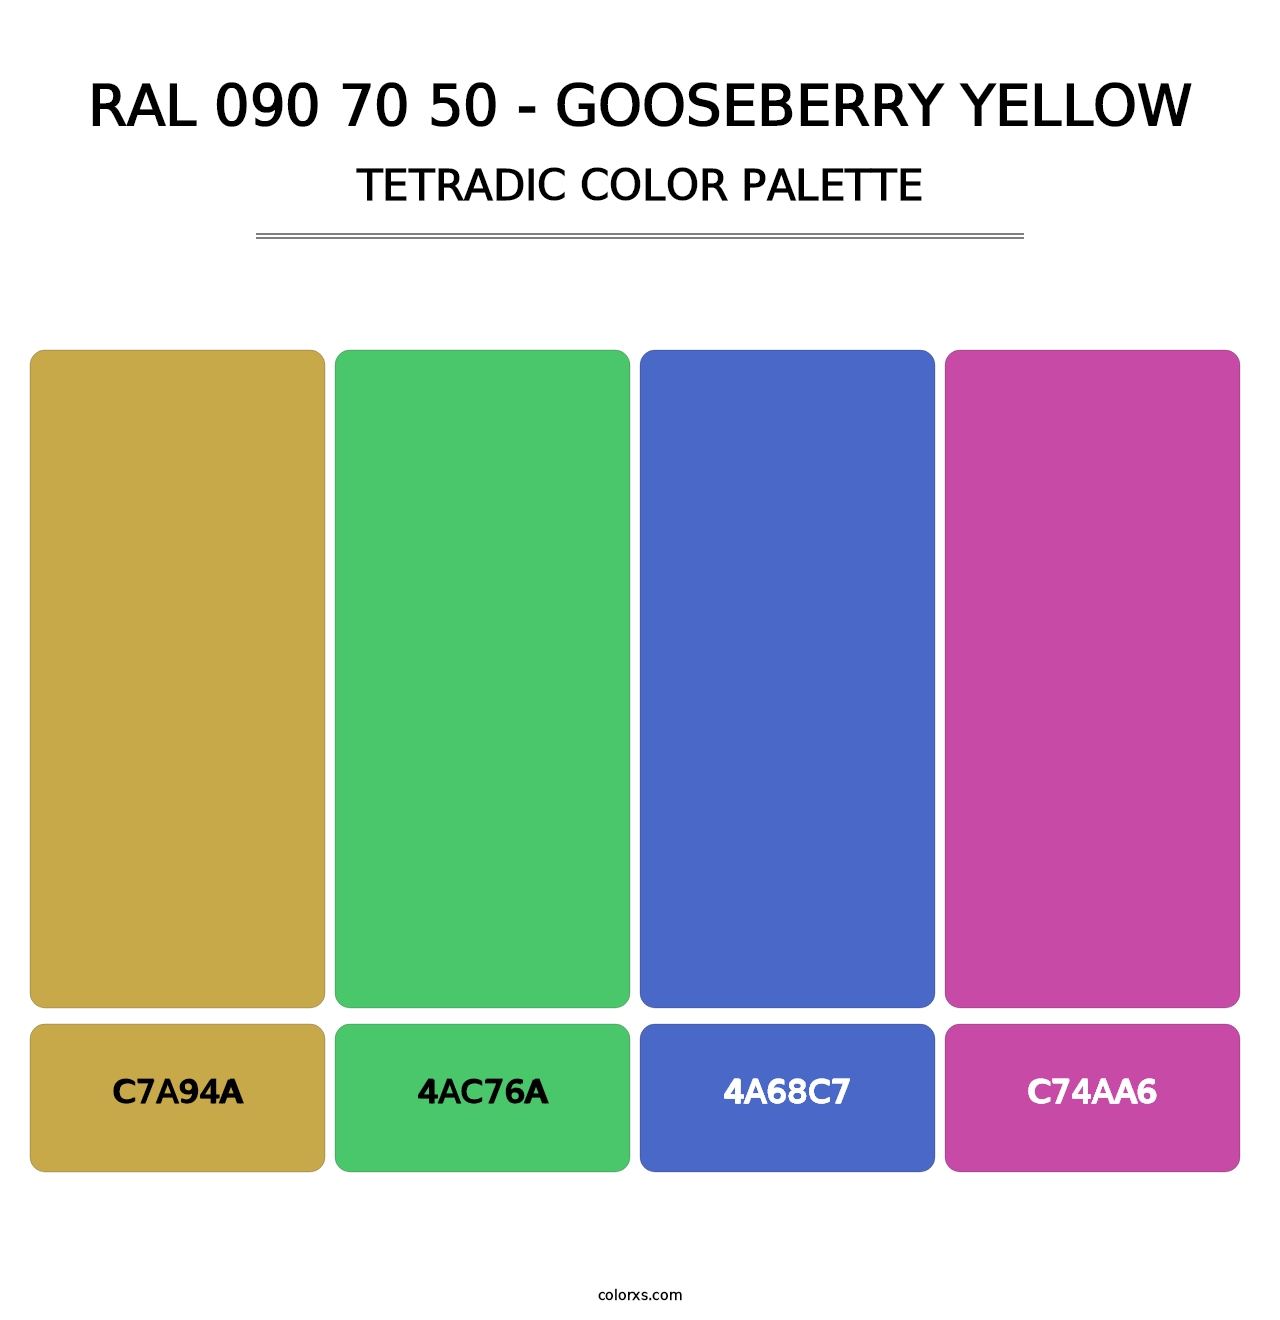 RAL 090 70 50 - Gooseberry Yellow - Tetradic Color Palette